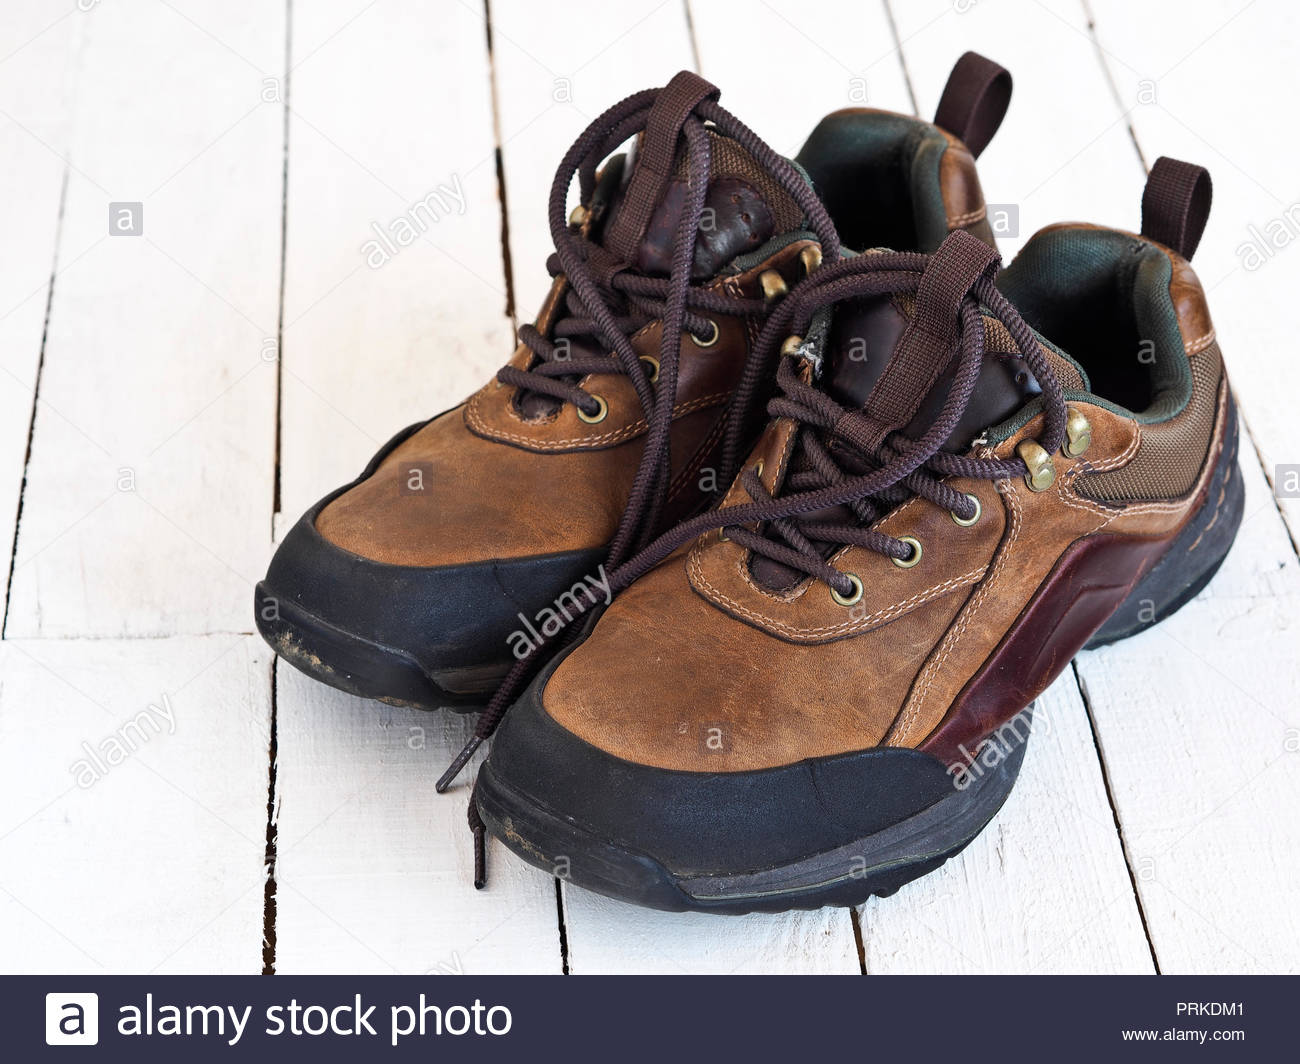 rockport hiking boots